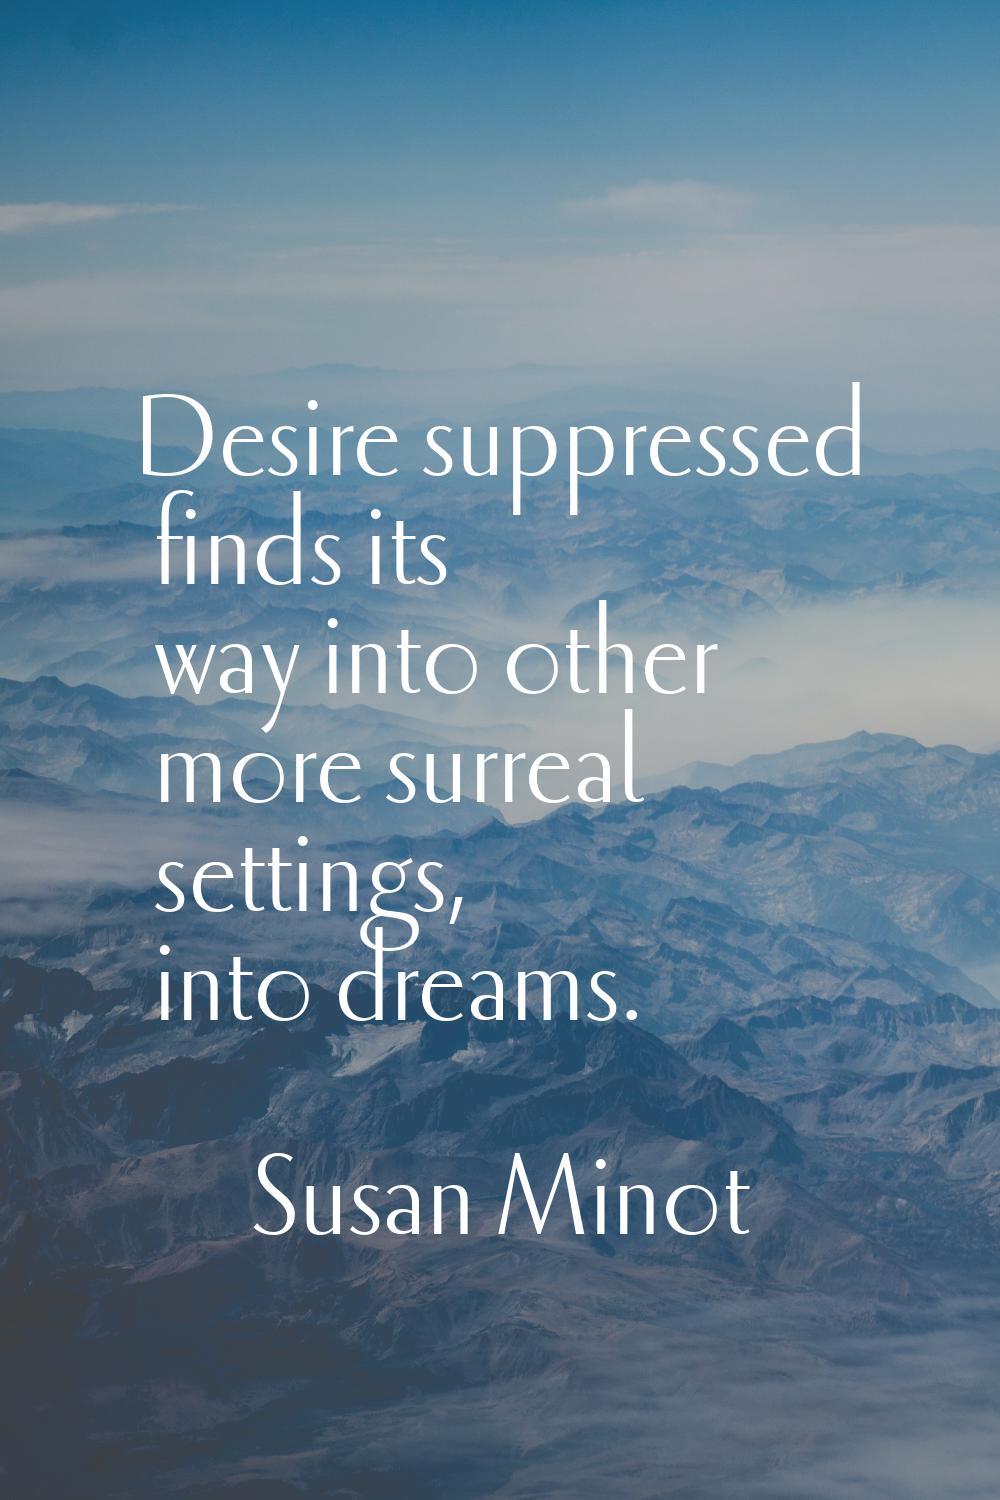 Desire suppressed finds its way into other more surreal settings, into dreams.